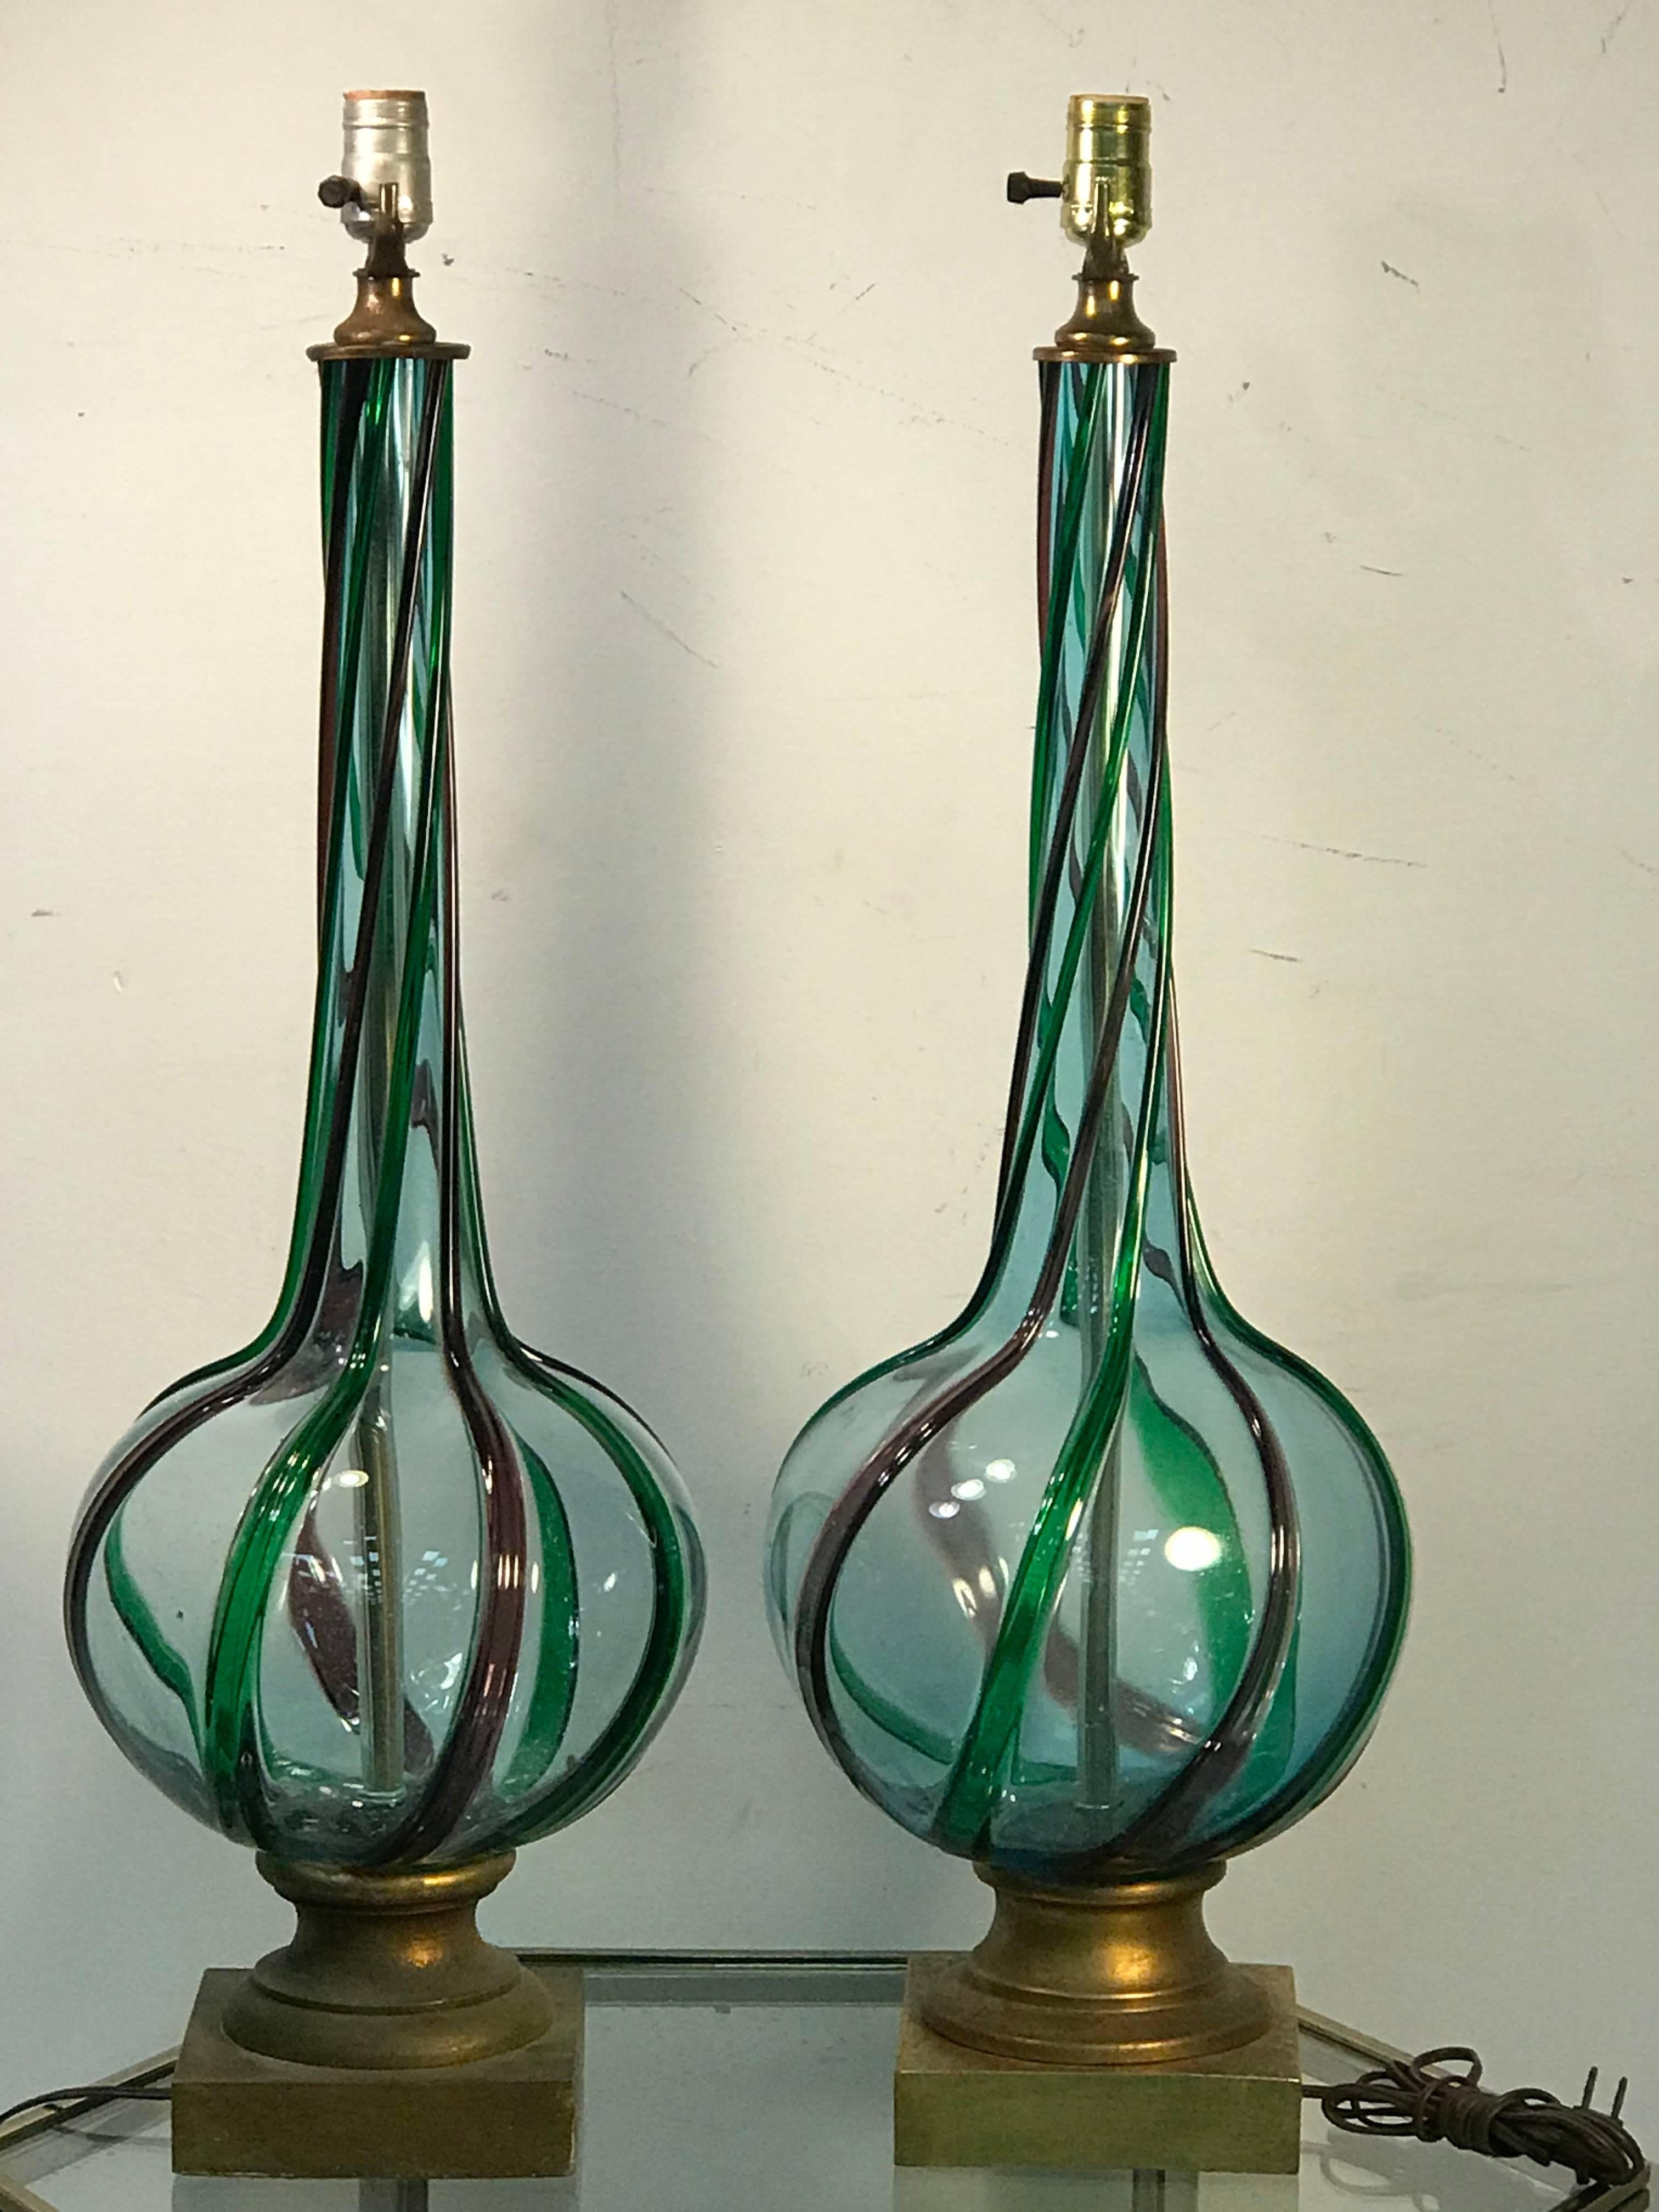 Great pair of modernist light aqua Murano lamps with applied green and purple swirled stripes, mounted on a giltwood base. Designed in the 1950s-1960s in Italy by Cenedese. Measurements of glass body alone are 24